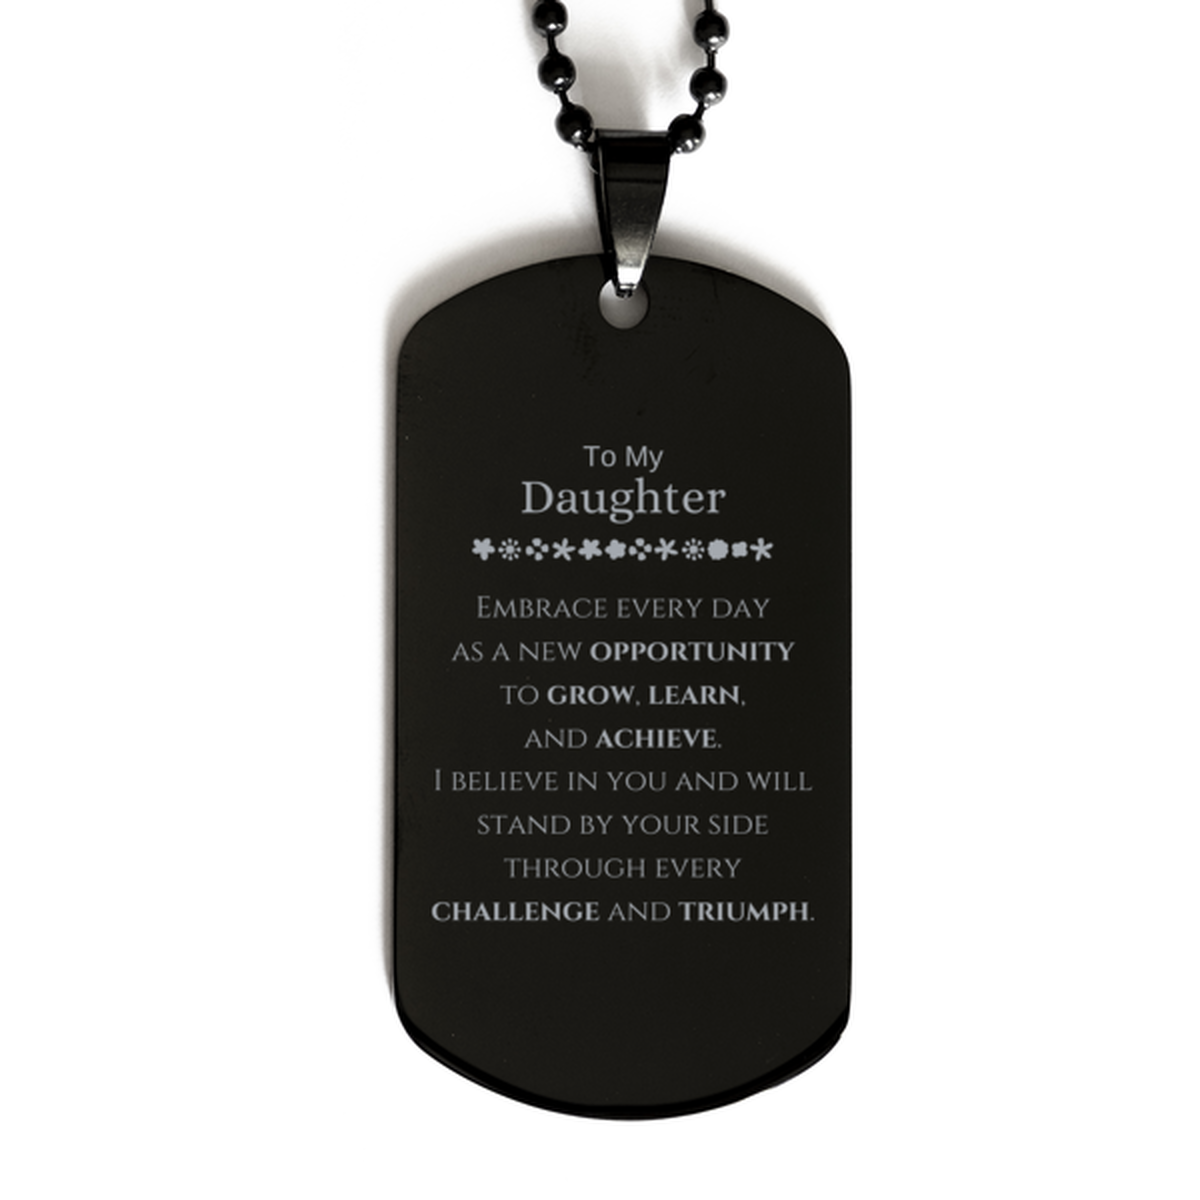 To My Daughter Gifts, I believe in you and will stand by your side, Inspirational Black Dog Tag For Daughter, Birthday Christmas Motivational Daughter Gifts